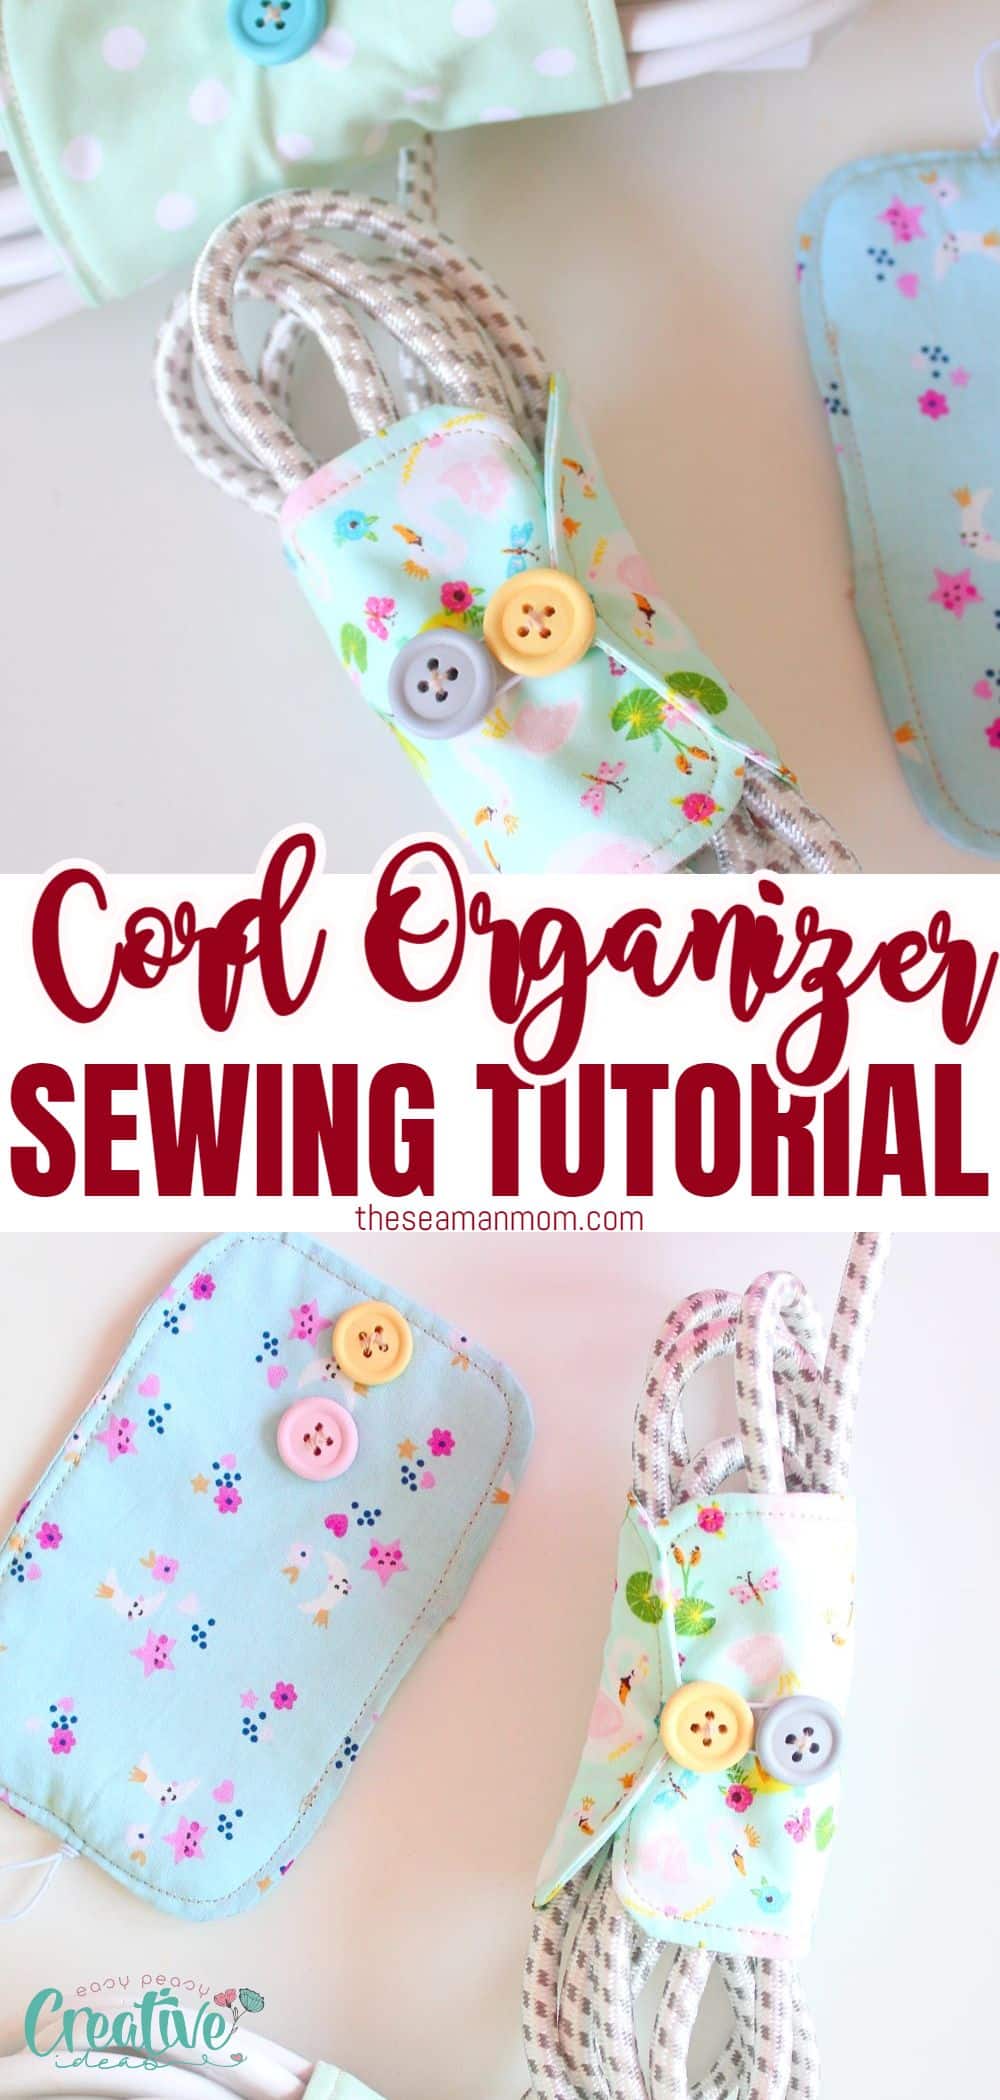 VIDEO How to fold and store tissue paper sewing patterns — Sew DIY